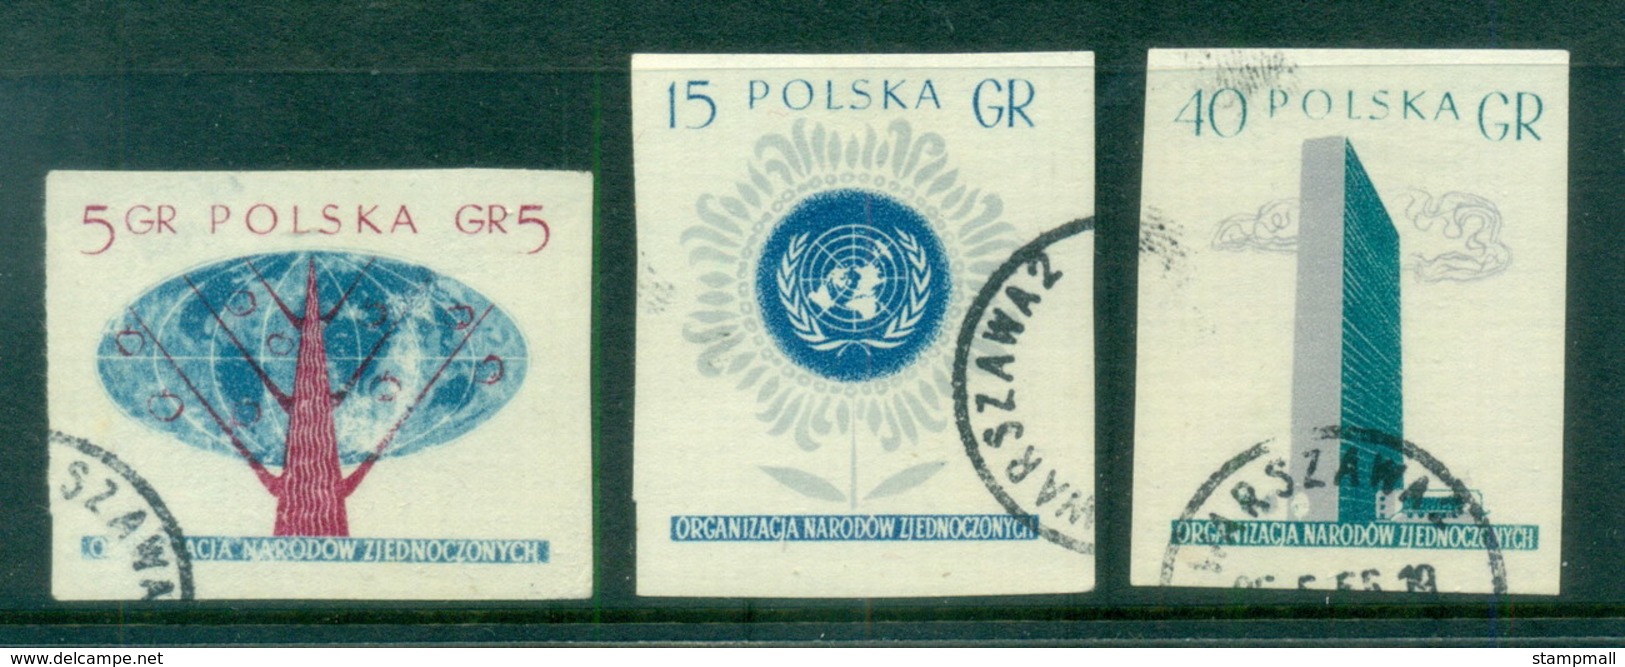 Poland 1957 UN IMPERF CTO - Used Stamps